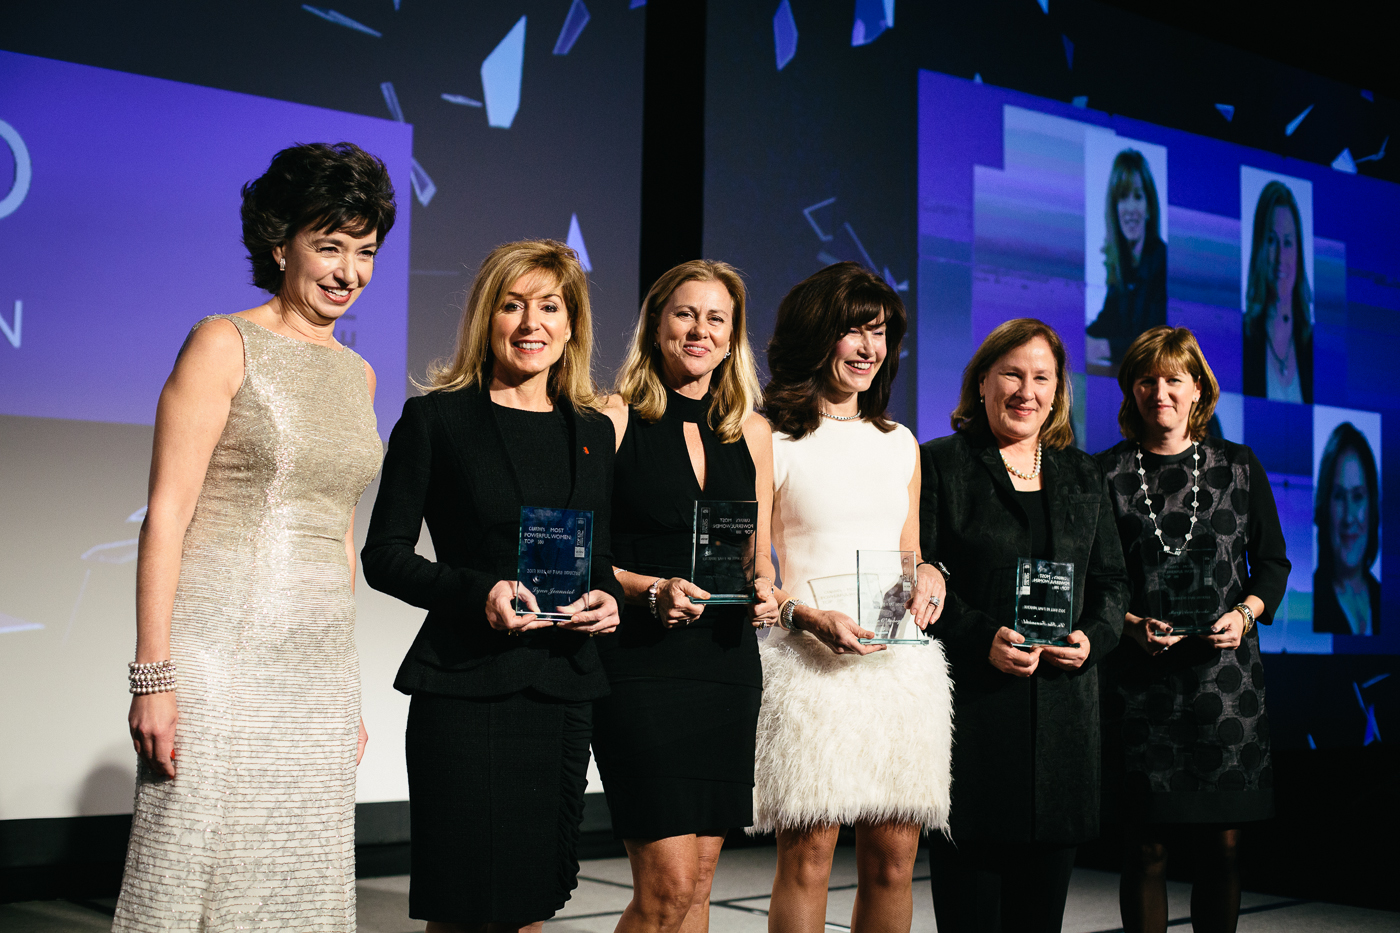 WXN Hall of Fame inductees at the Dec. 4 gala in Toronto – Mary Ann Turcke is at far right.